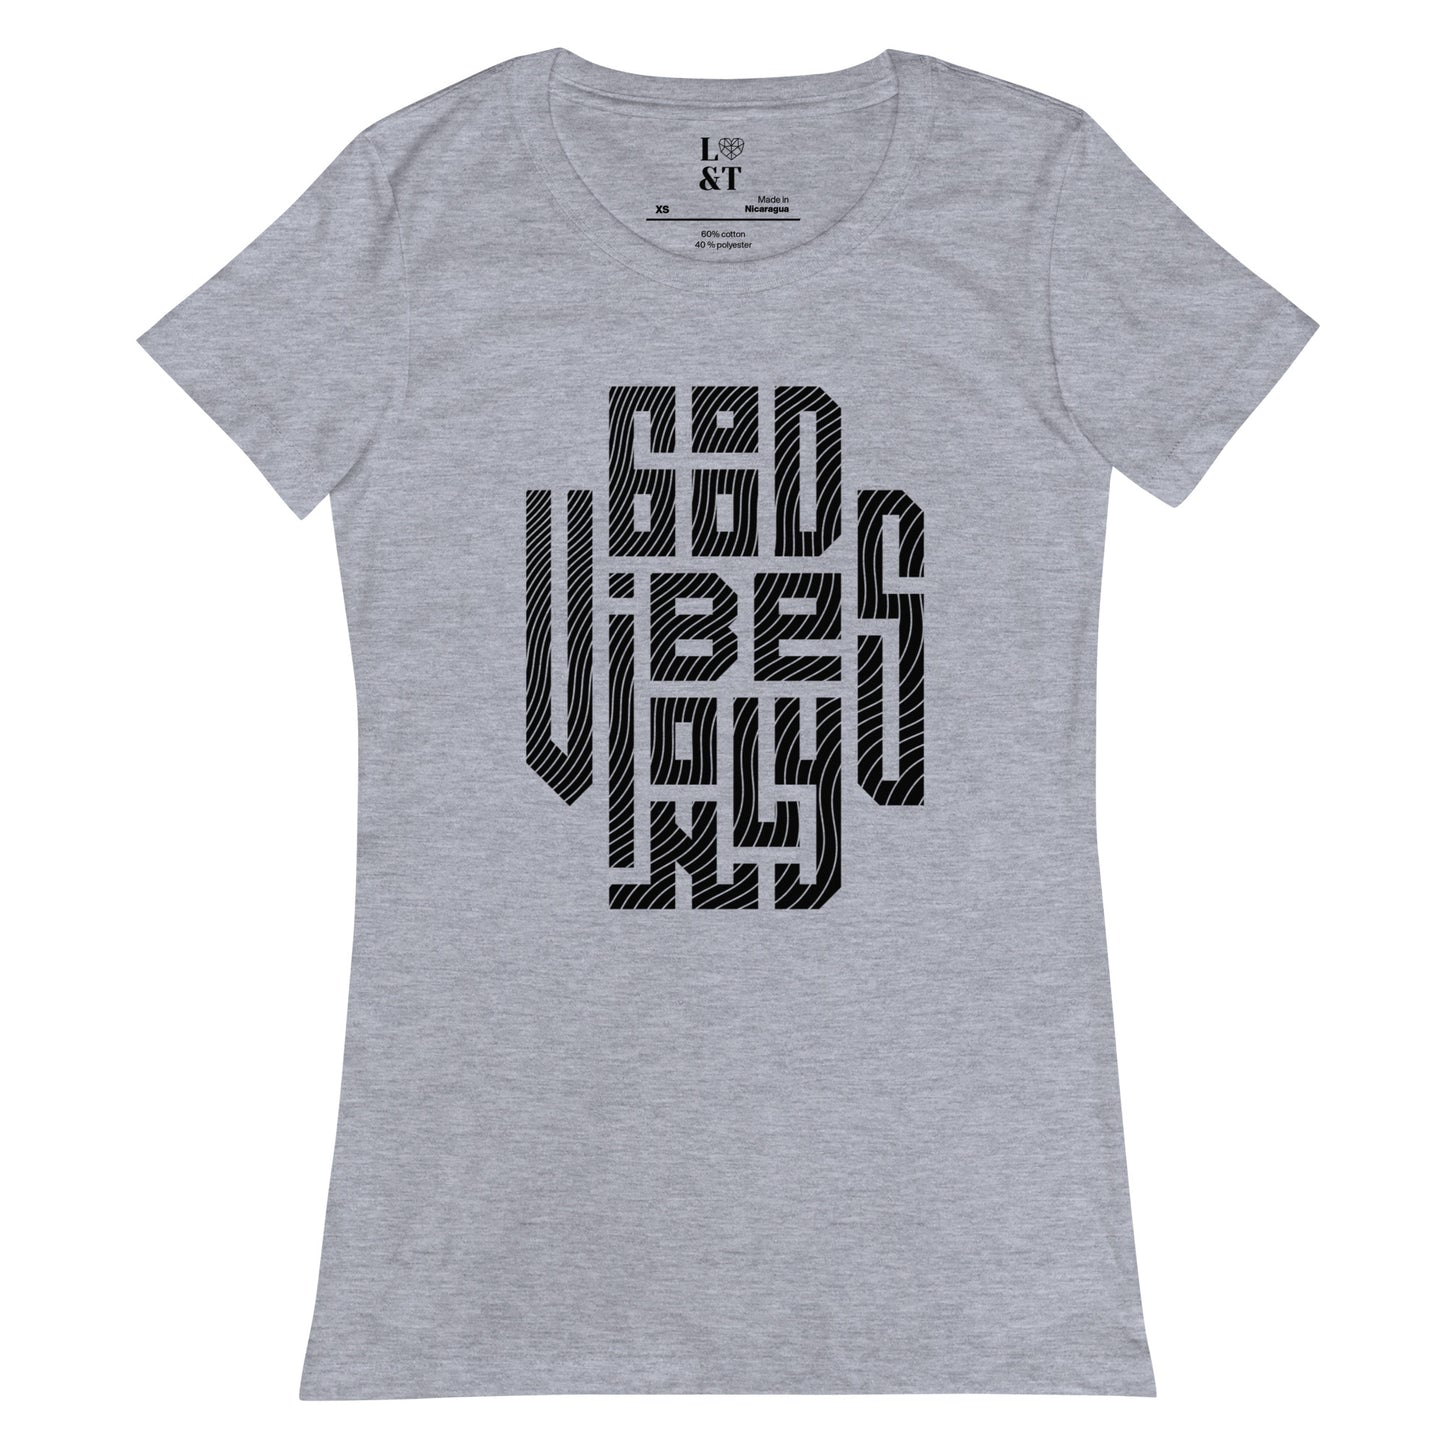 Good Vibes Only Women’s Fitted T-Shirt